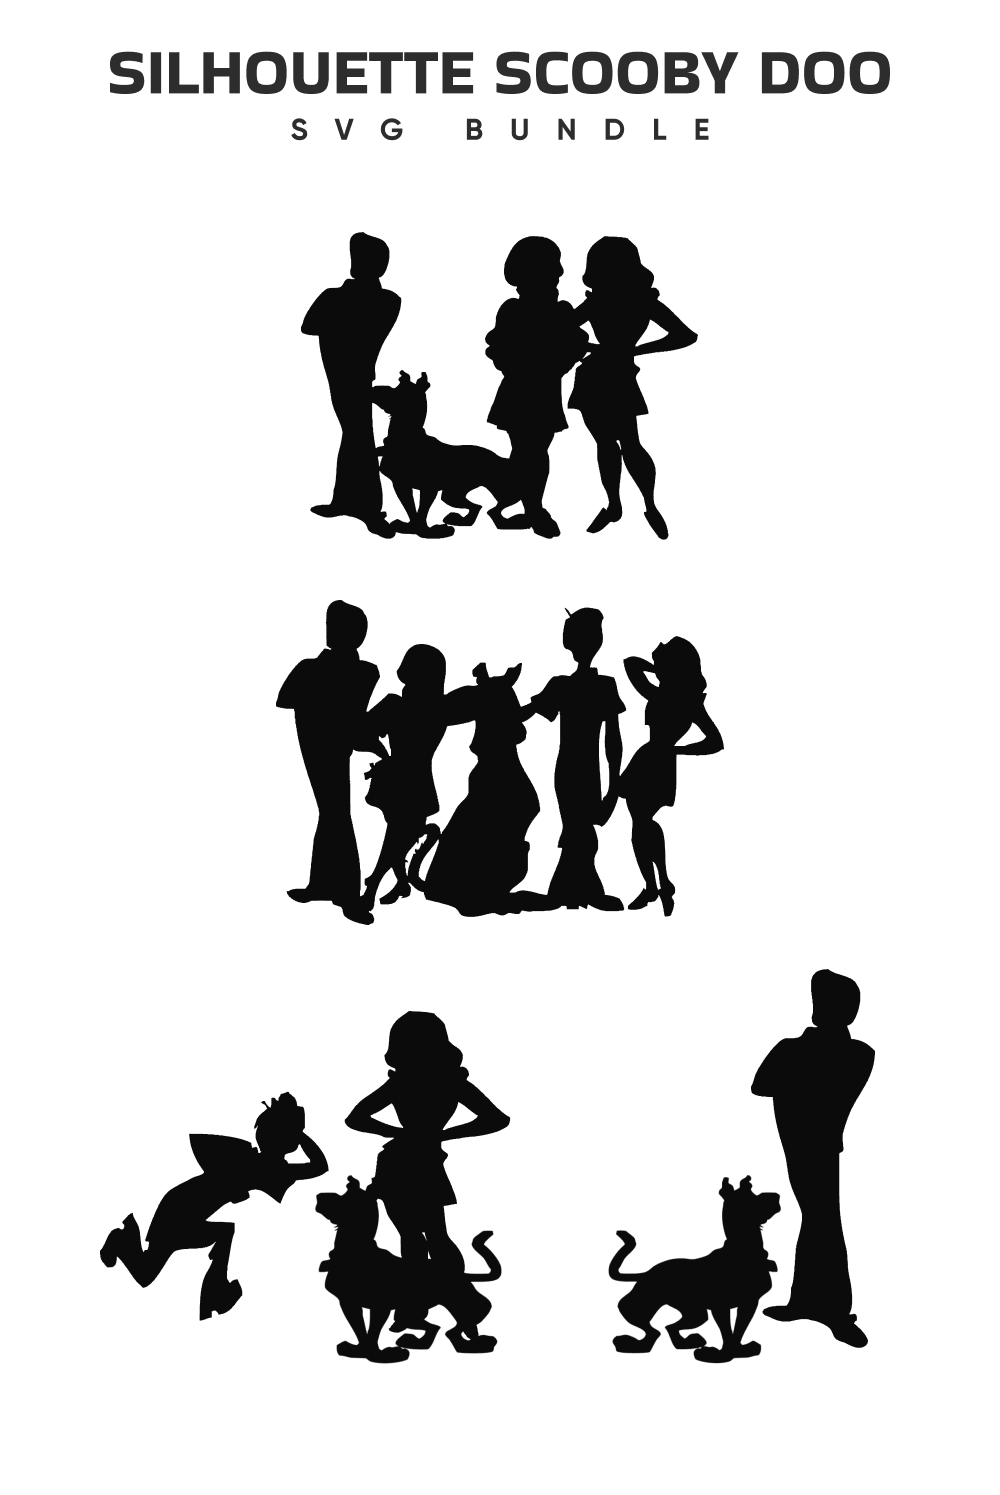 Silhouette scooby doo collection.